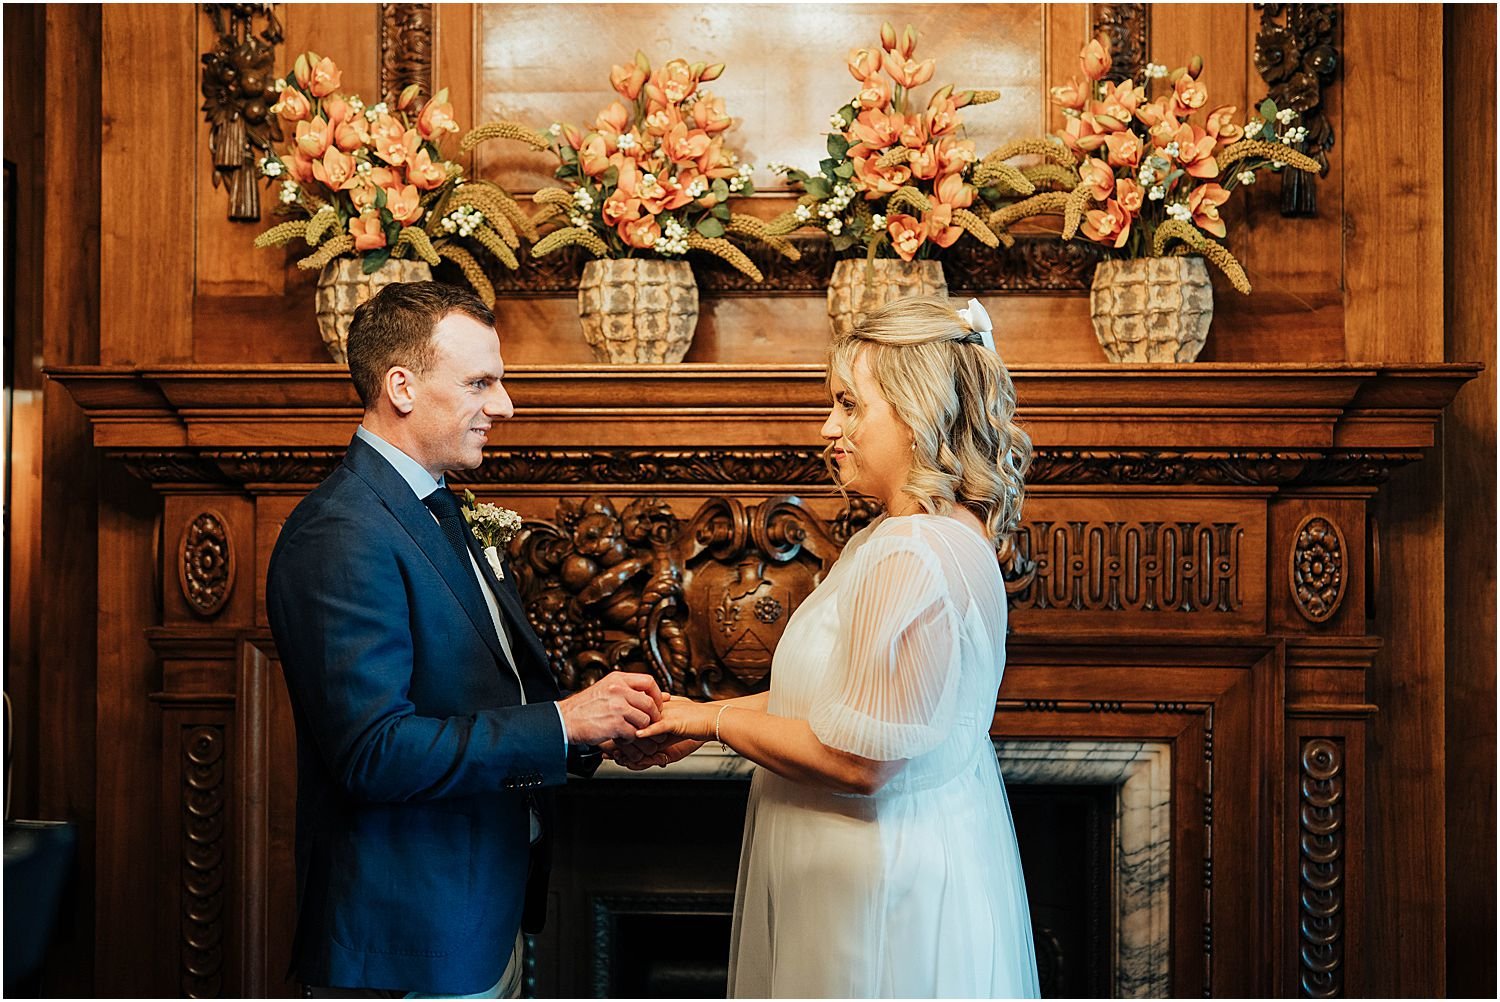 Bride and groom exchanging rings in Paddington Room at Old Marylebone Town Hall